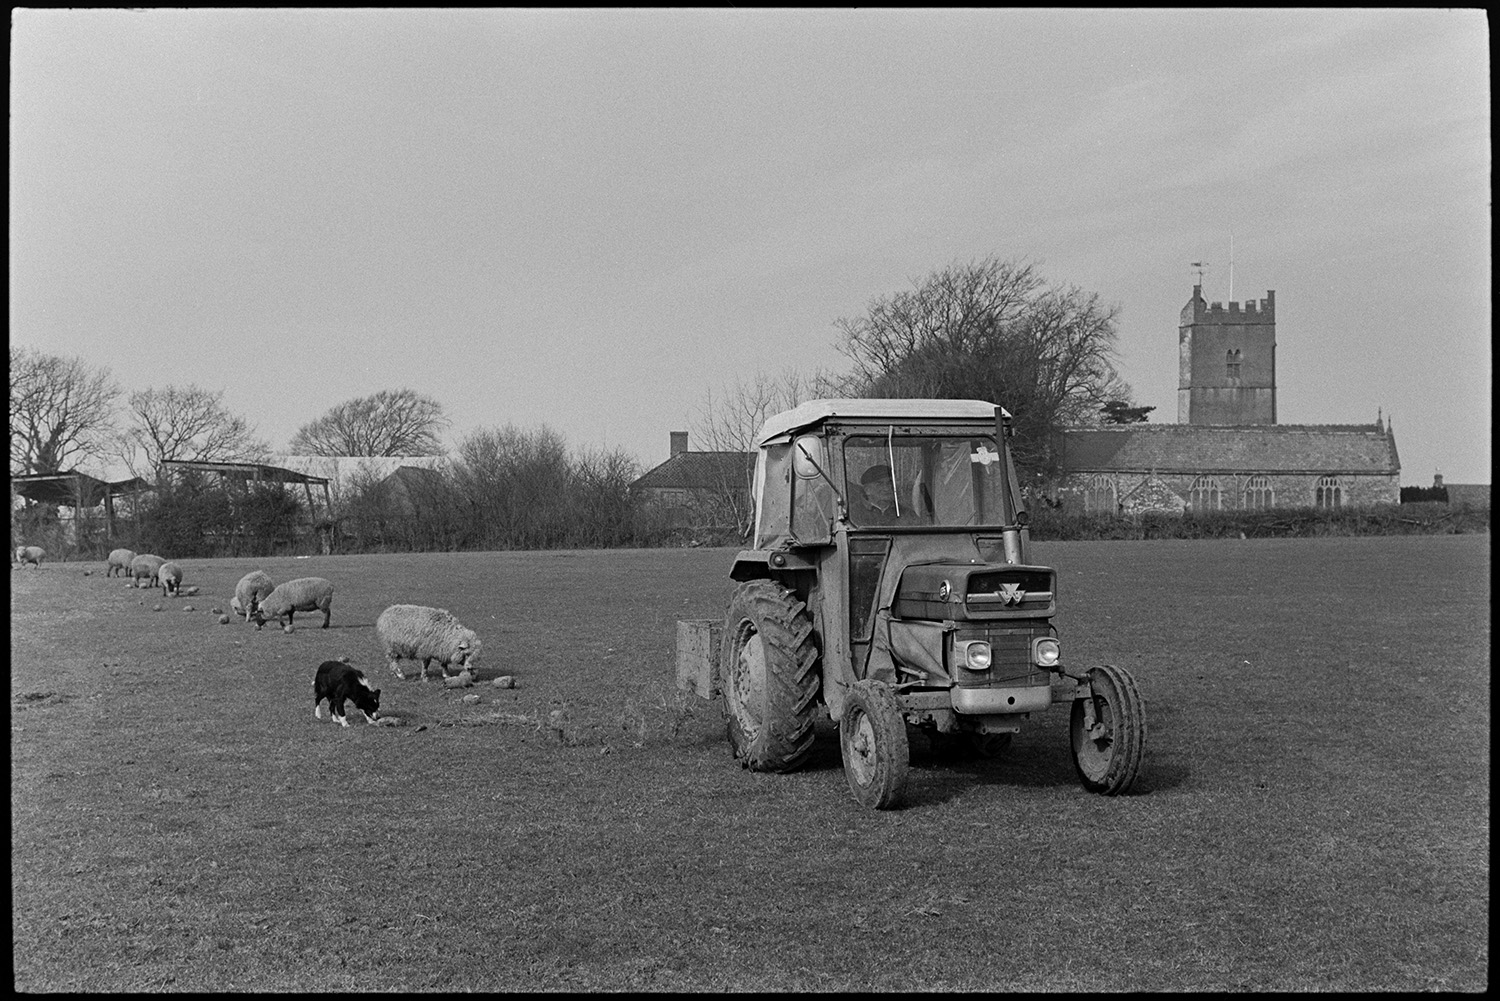 Barns, empty, with lambs and ewes, tractor, feeding in field.
[A man driving a tractor with a link box, and feeding sheep with mangolds or mangelwurzels, in a field at The Barton, Burrington. A dog is also in the field. Trees, Burrington church and farm buildings are in the background.]